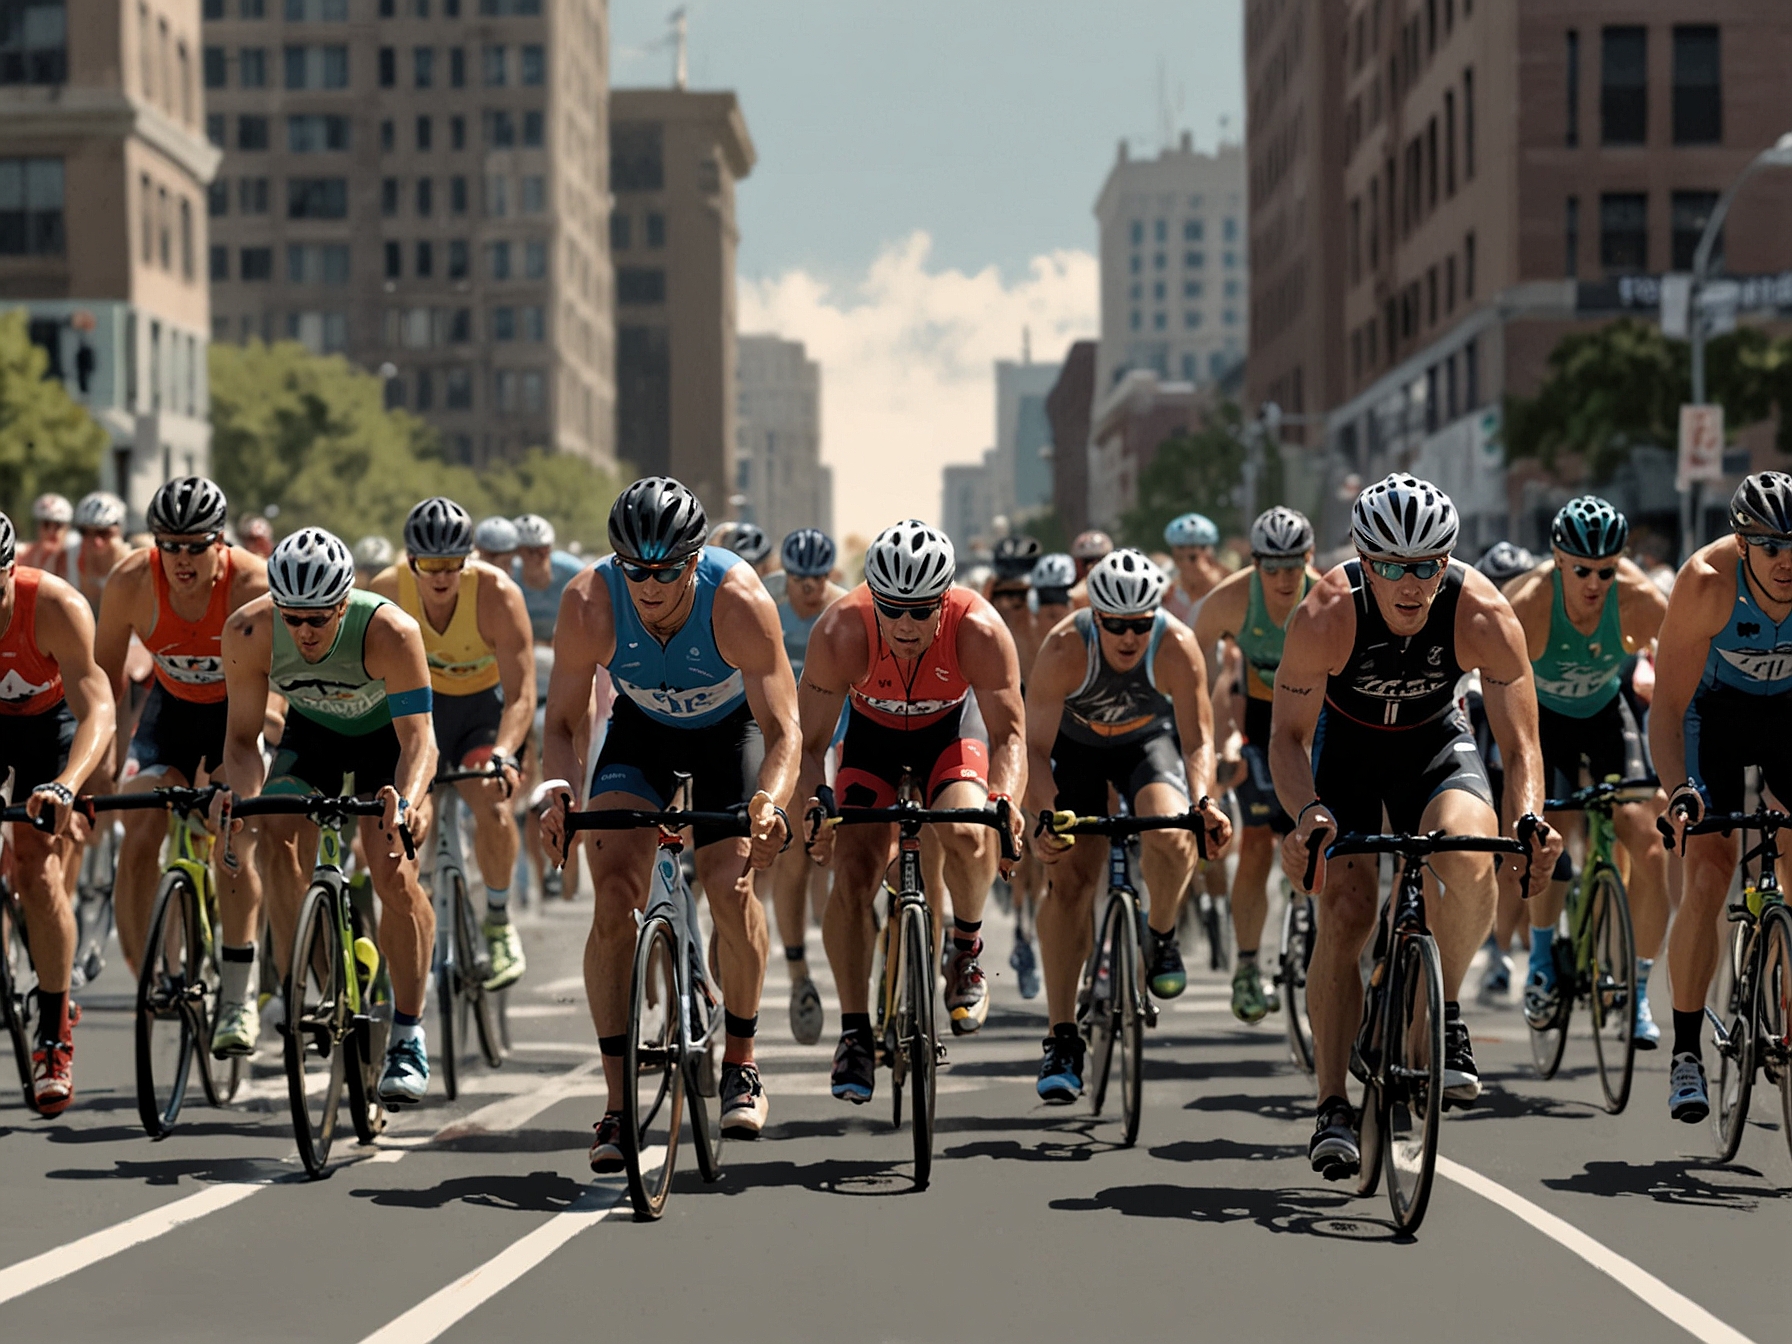 Athletes competing in supertri's new North American events, set against the iconic backdrops of Boston and Chicago. Spectators marvel at the intense, fan-friendly one-mile courses designed to test endurance and strategy.